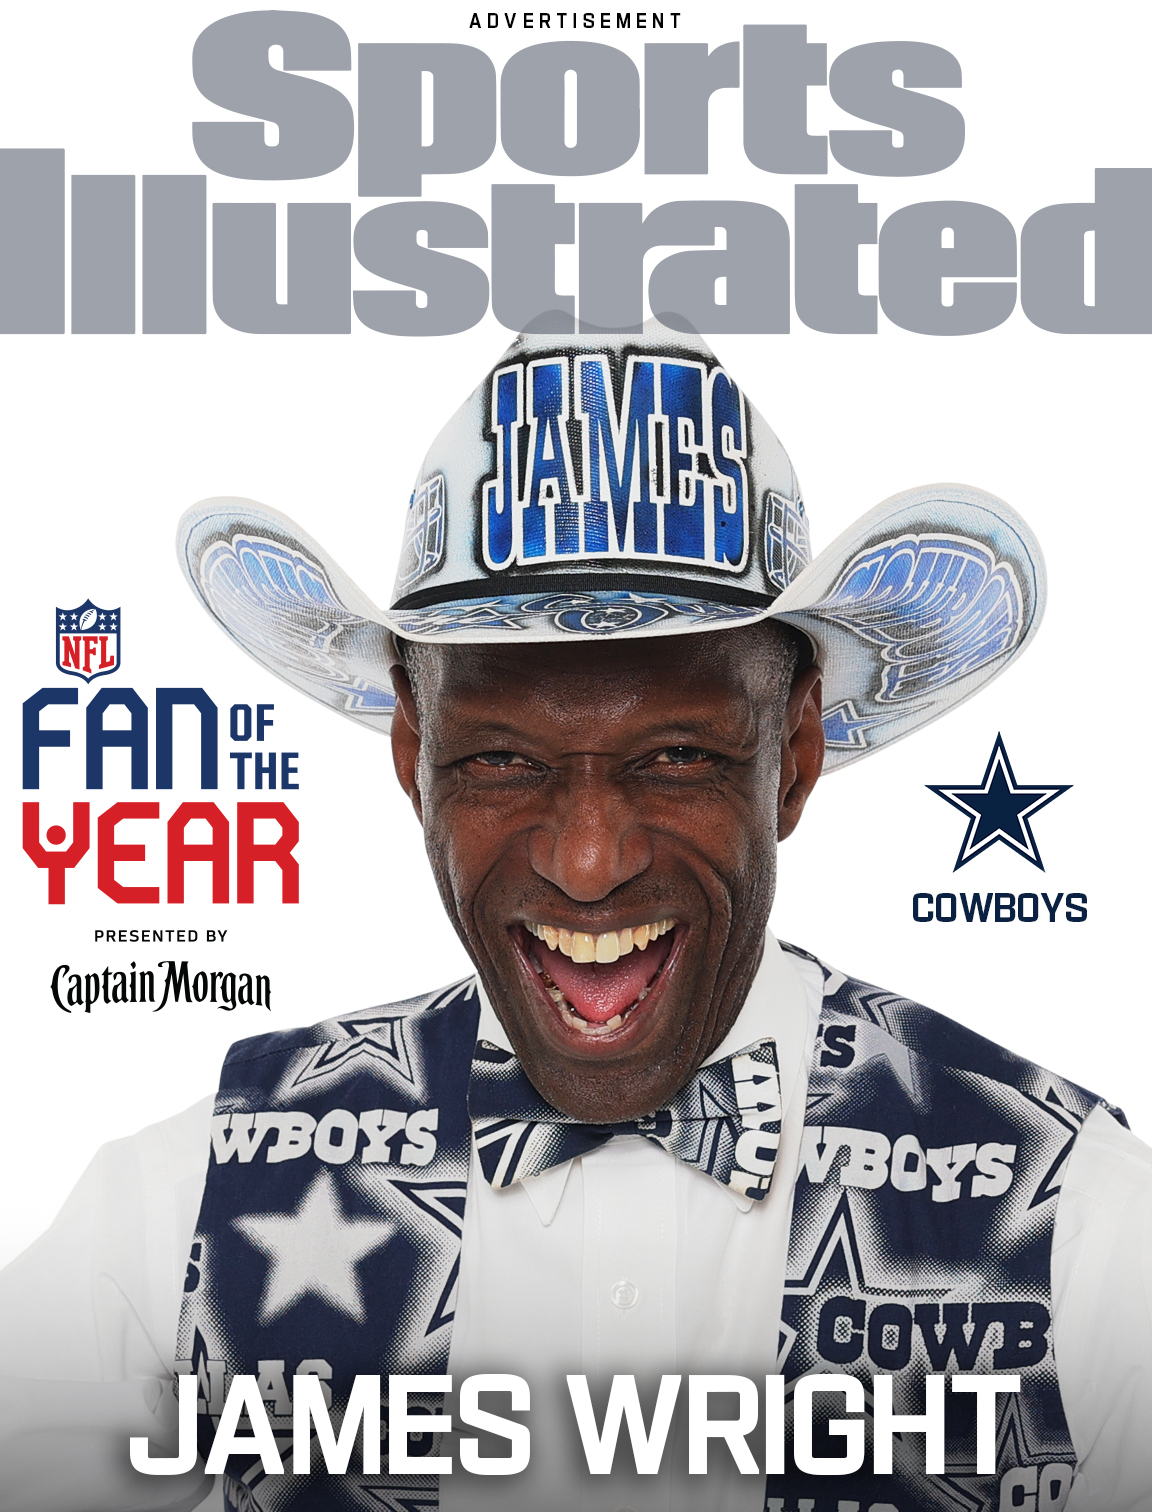 Dallas Cowboys Fan of the Year James Wright will appear in a high-impact cover peel ad execution and custom spread creative in the February issue of Sports Illustrated.